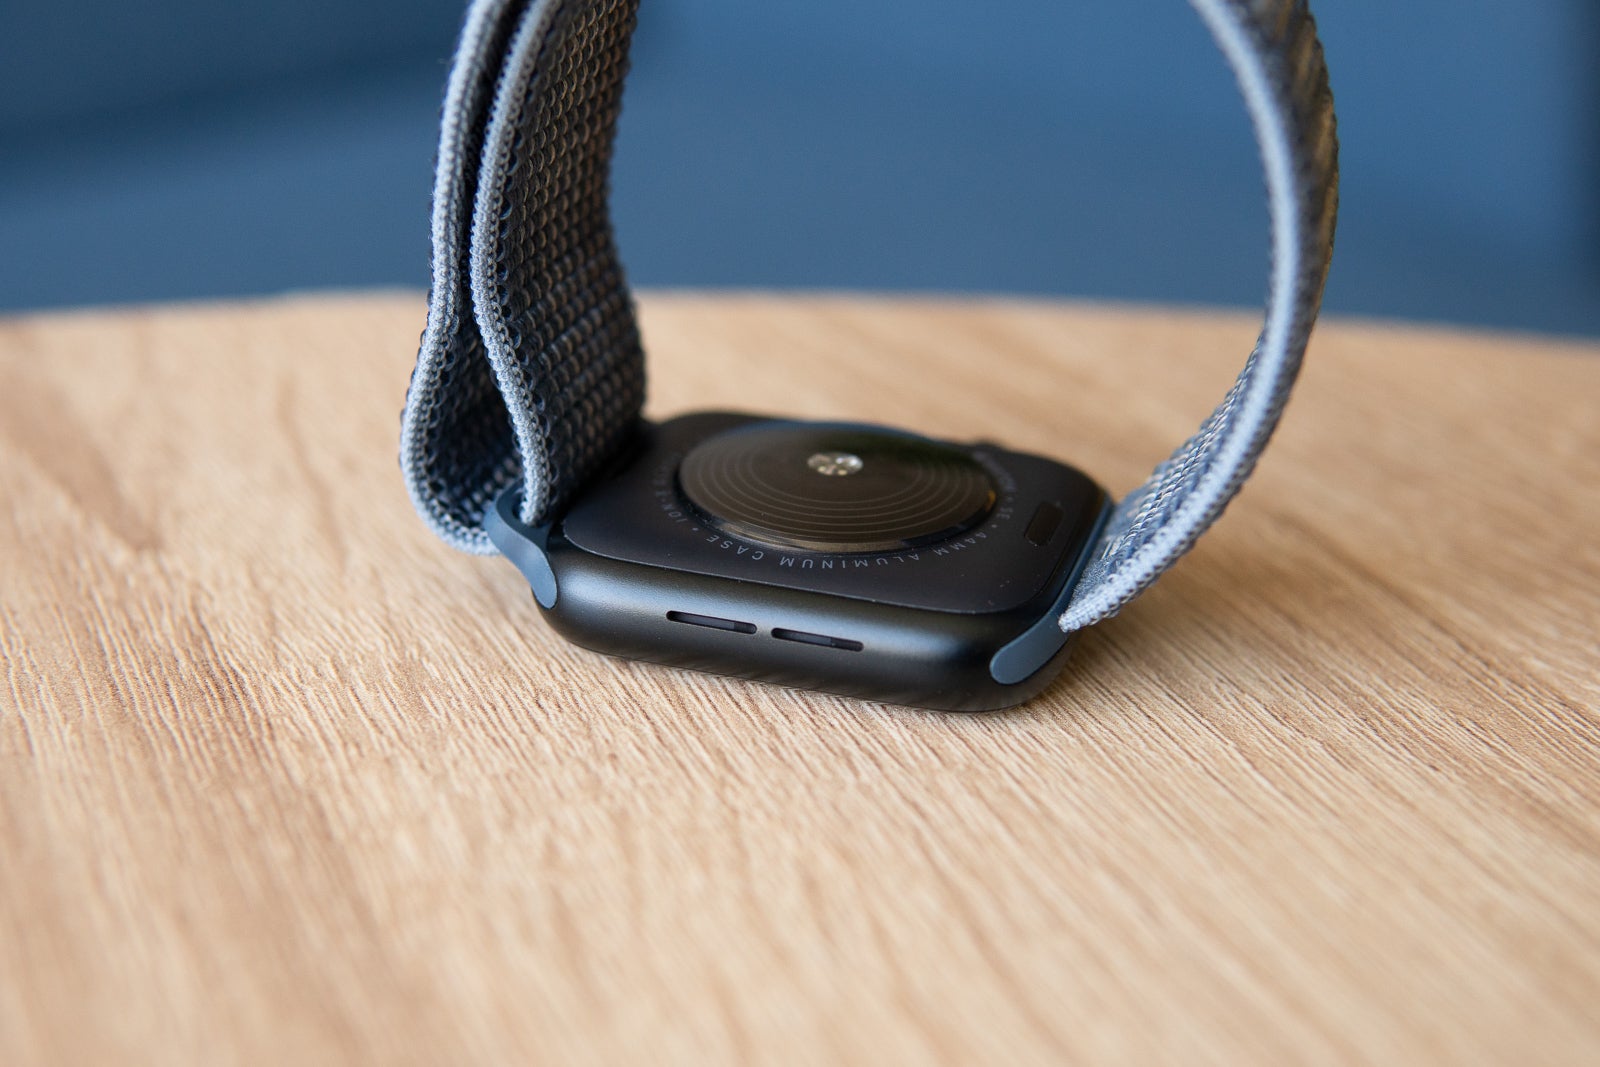 (Image credit - PhoneArena) Apple Watch SE 2 speaker grill - Apple Watch SE 2 (2022) review: The affordable Apple Watch; why pay more?